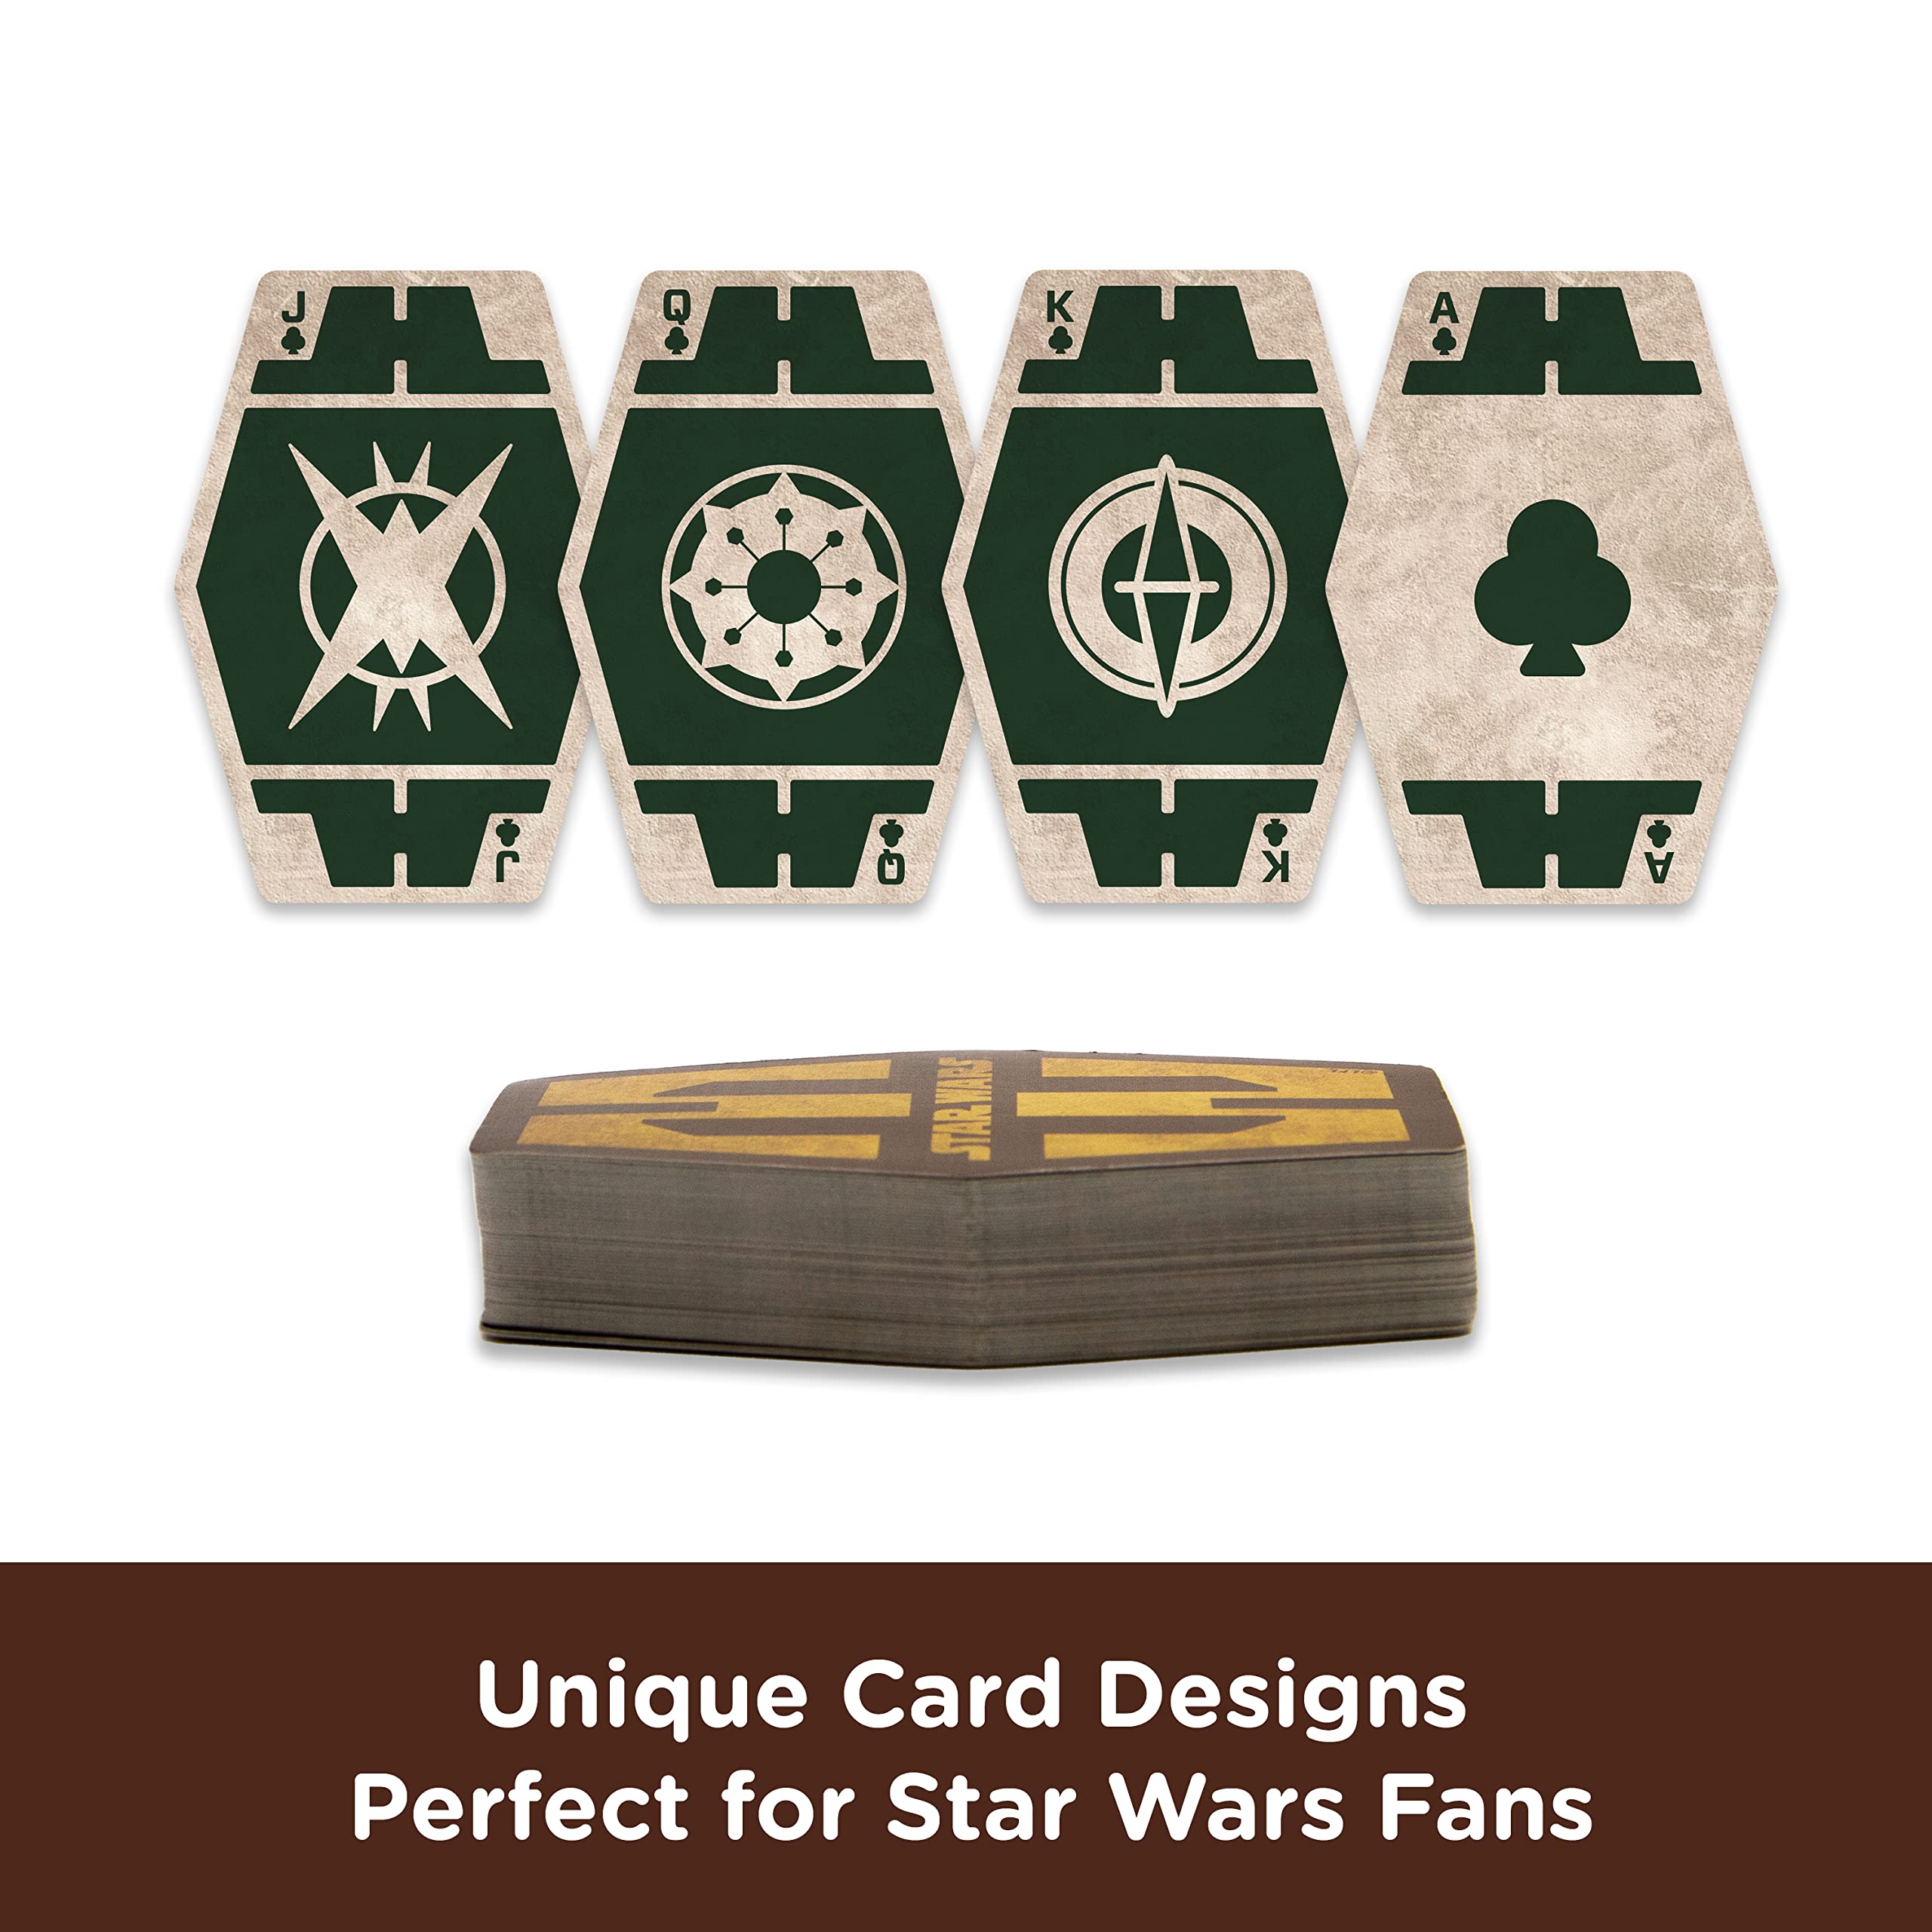 AQUARIUS Star Wars Playing Cards - Star Wars Sabacc Shaped Deck of Cards for Your Favorite Card Games - Officially Licensed Star Wars Merchandise & Collectibles